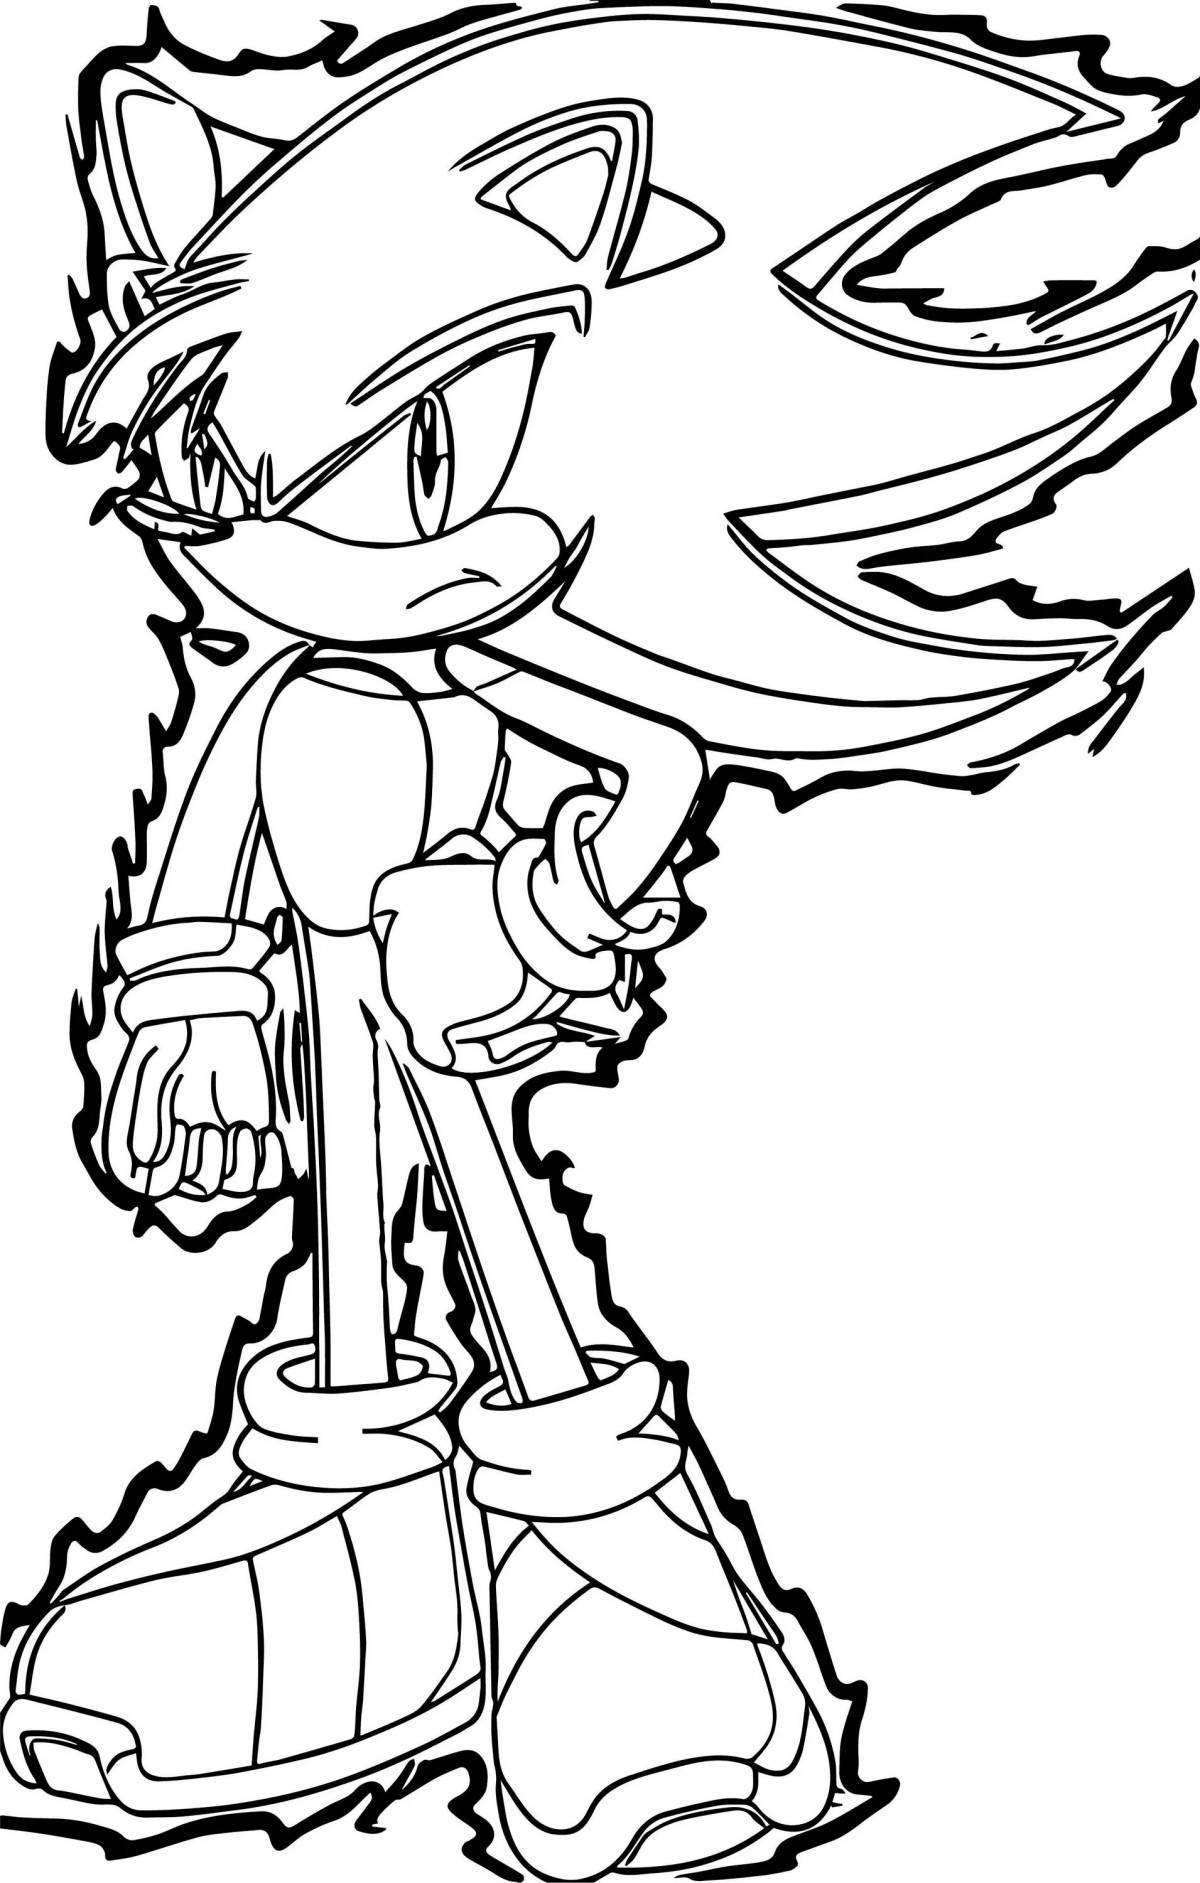 Cute minecraft sonic coloring page